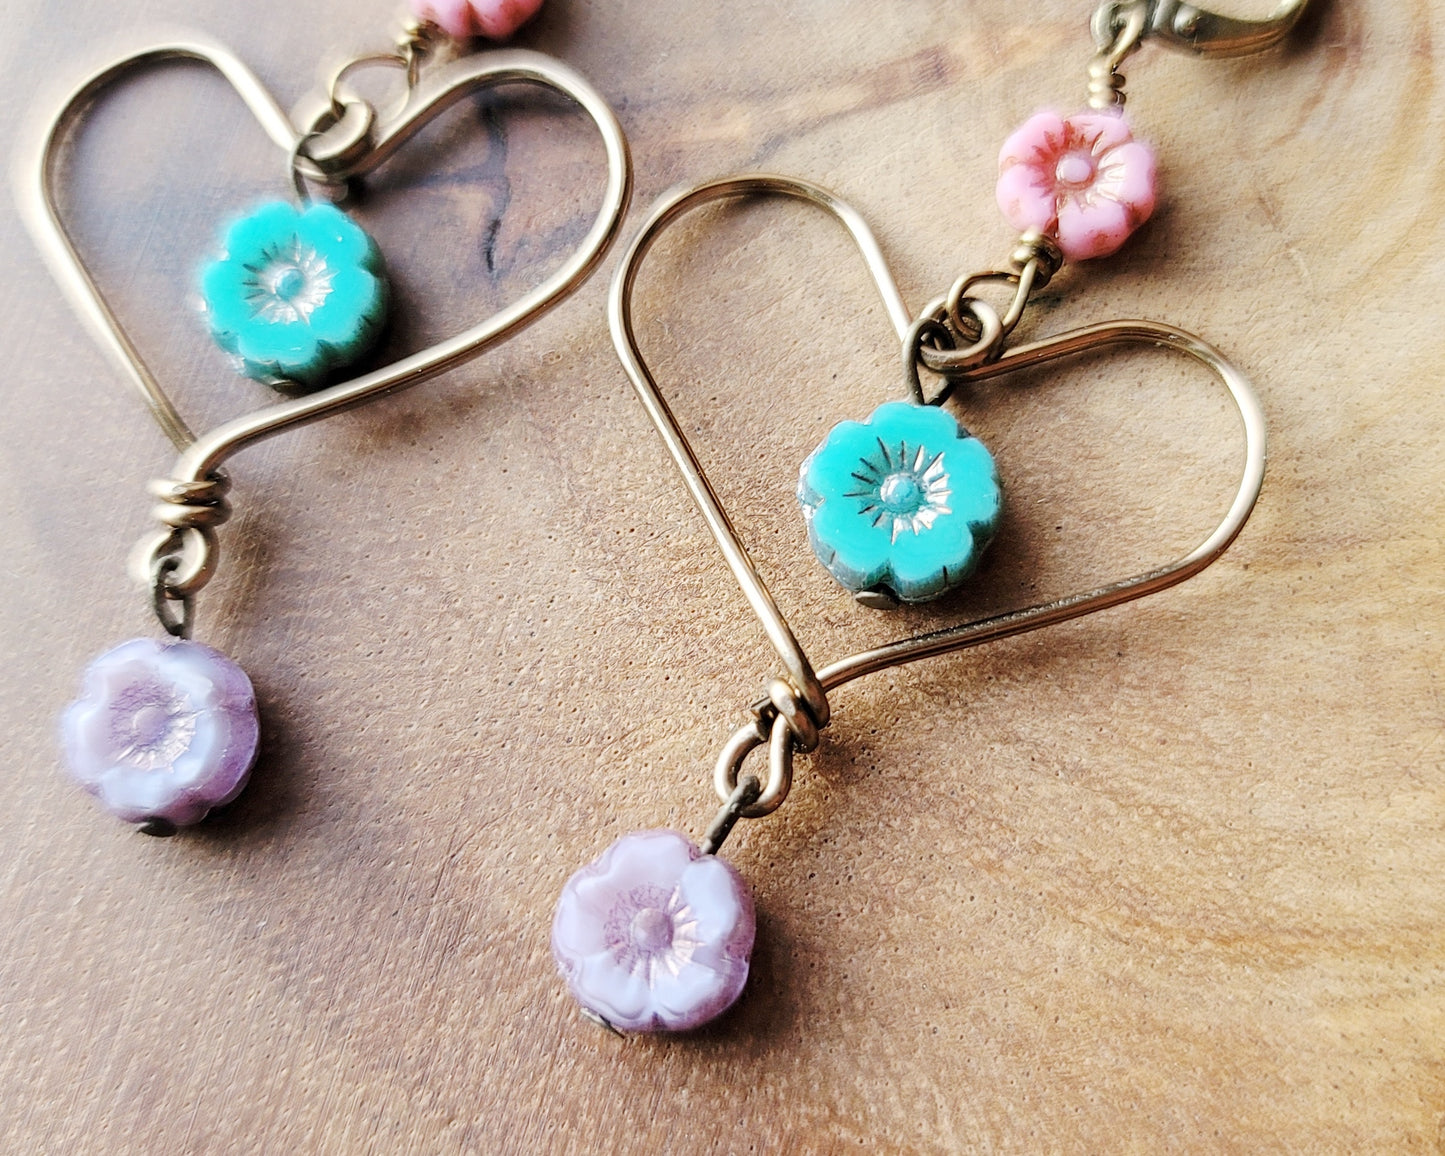 Long Heart Flower Earrings, Hand forged, large Heart with glass Flowers: Pink, Blue and Lavender